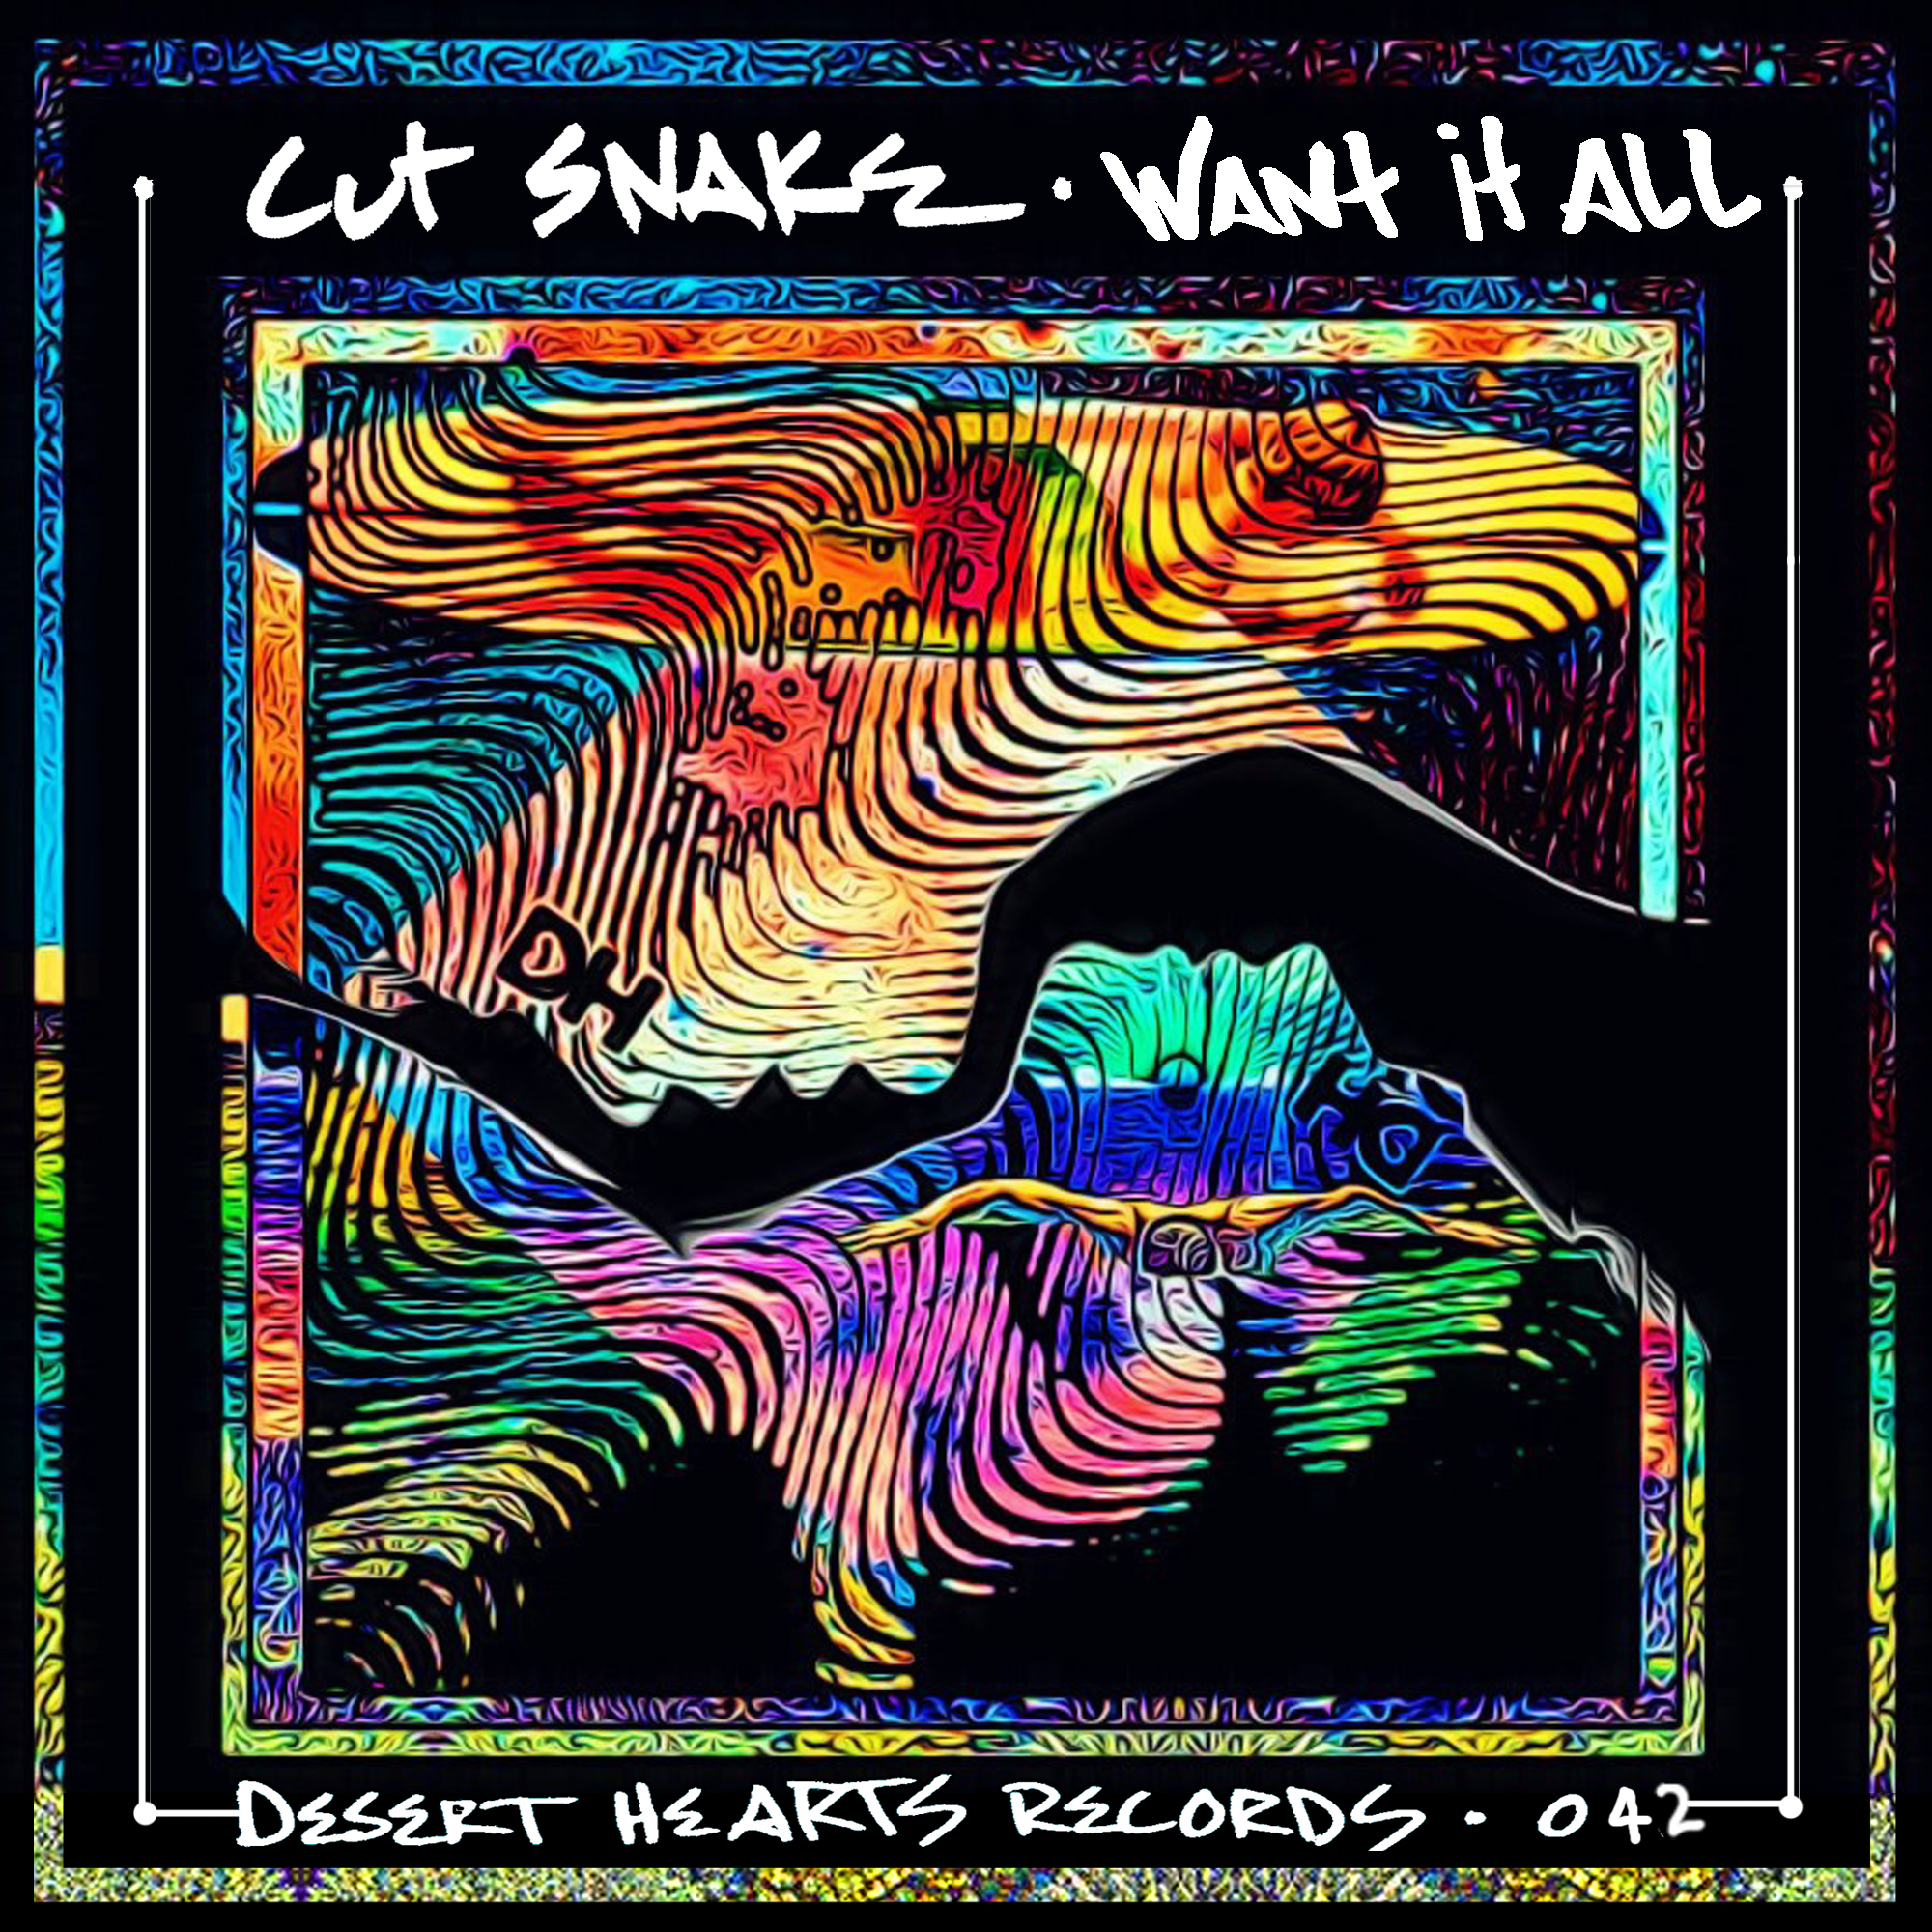 Cutsnake - Want It All [Square].jpg